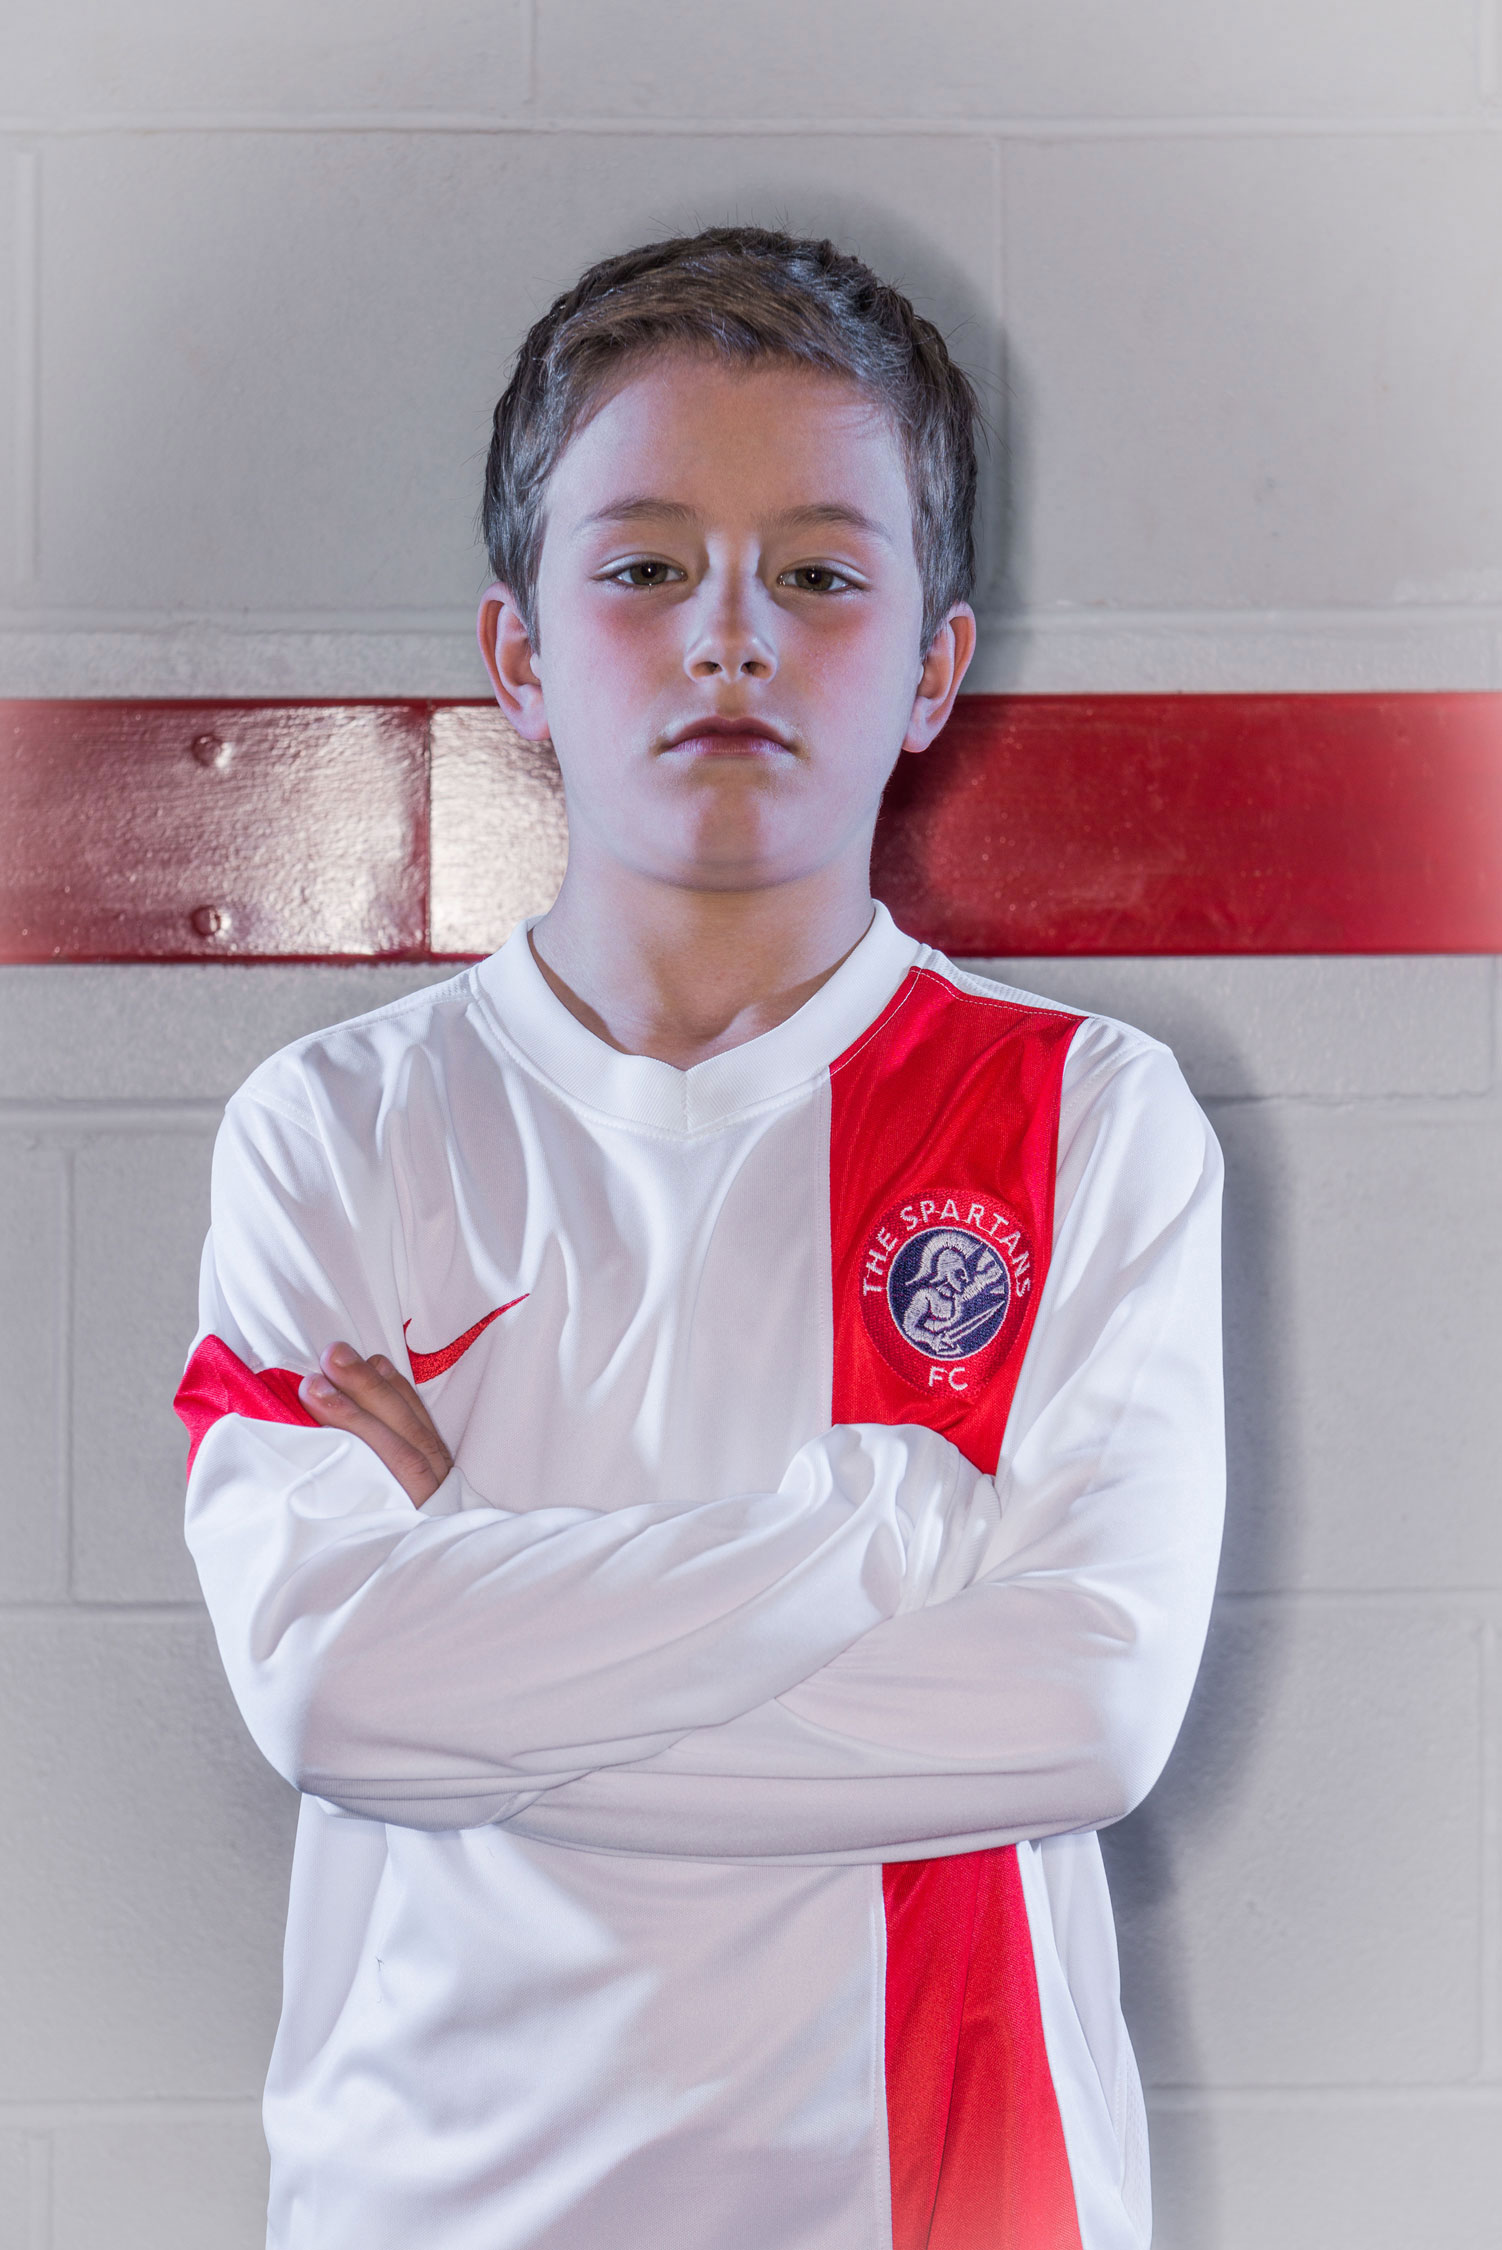 Portrait of young boy in football kit in changing room, Edinburgh